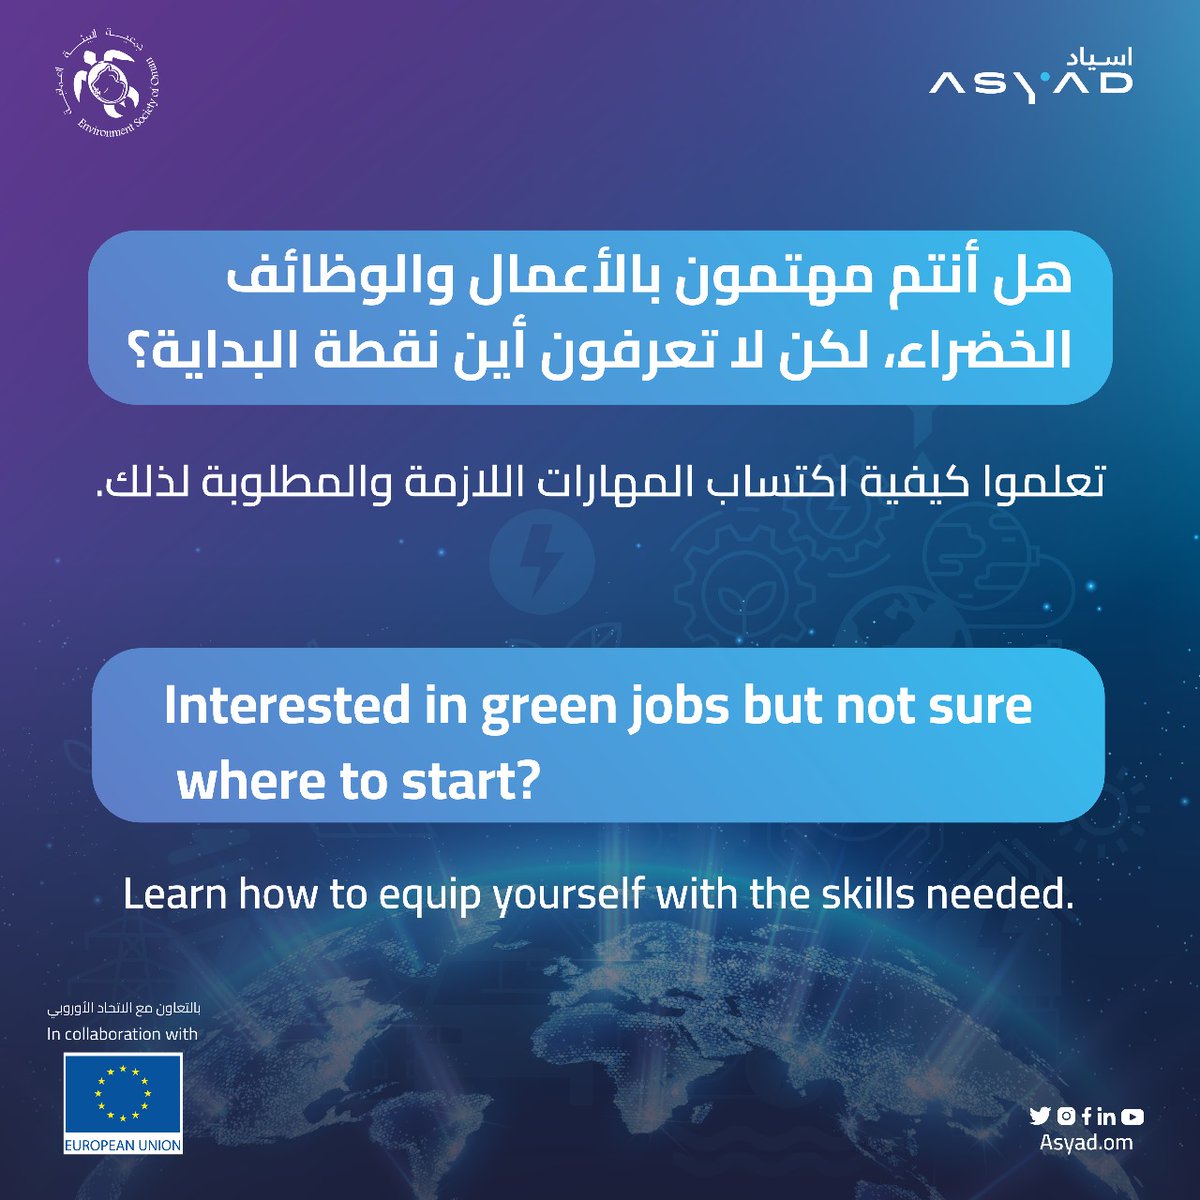 Are you located in #Oman 🇴🇲 & ready to shape the future? Join us on 14 May from 9 AM-1 PM at #Muscat University for 'Green Jobs and The Youth Perspective' ♻️ where European expert Raquel Noboa will talk about green skills & jobs of the future. Register 👉 asyad.om/oman-climate-c…